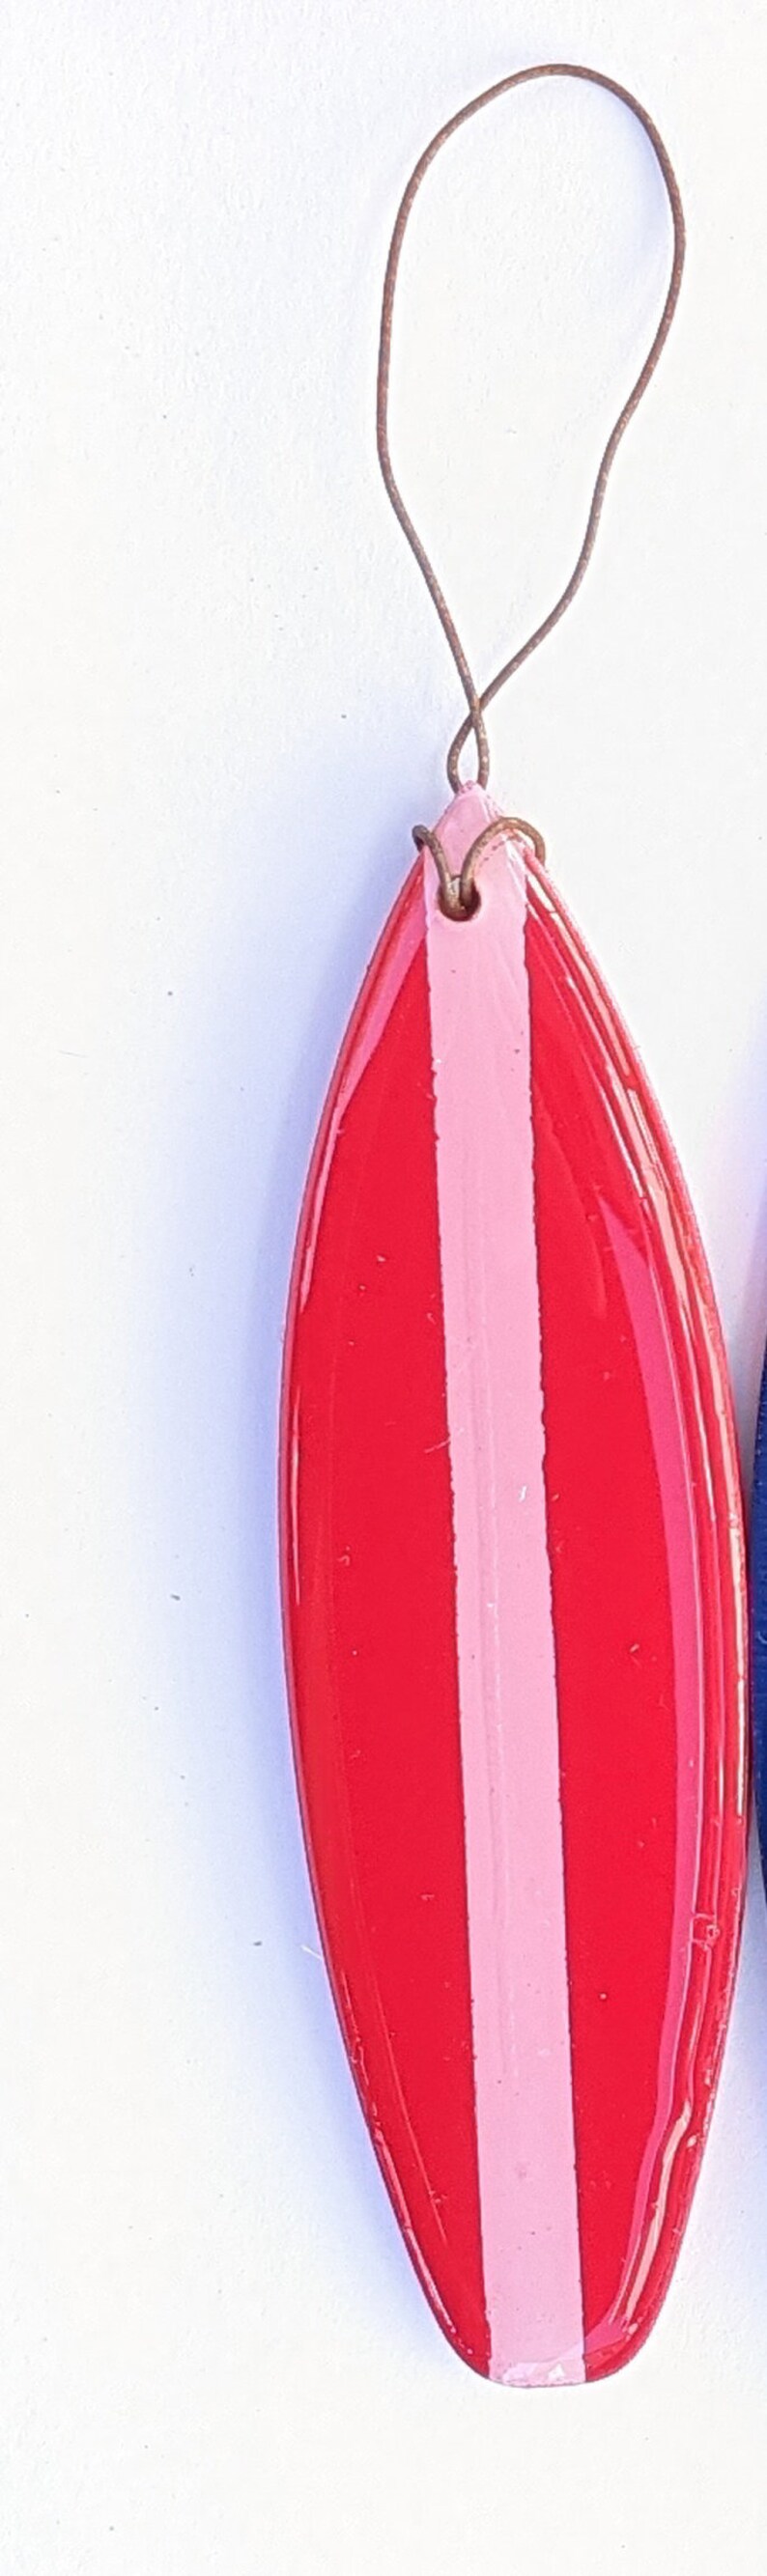 Single Surfboard Ornament Surf Decor Surf Ornament Pink & Red